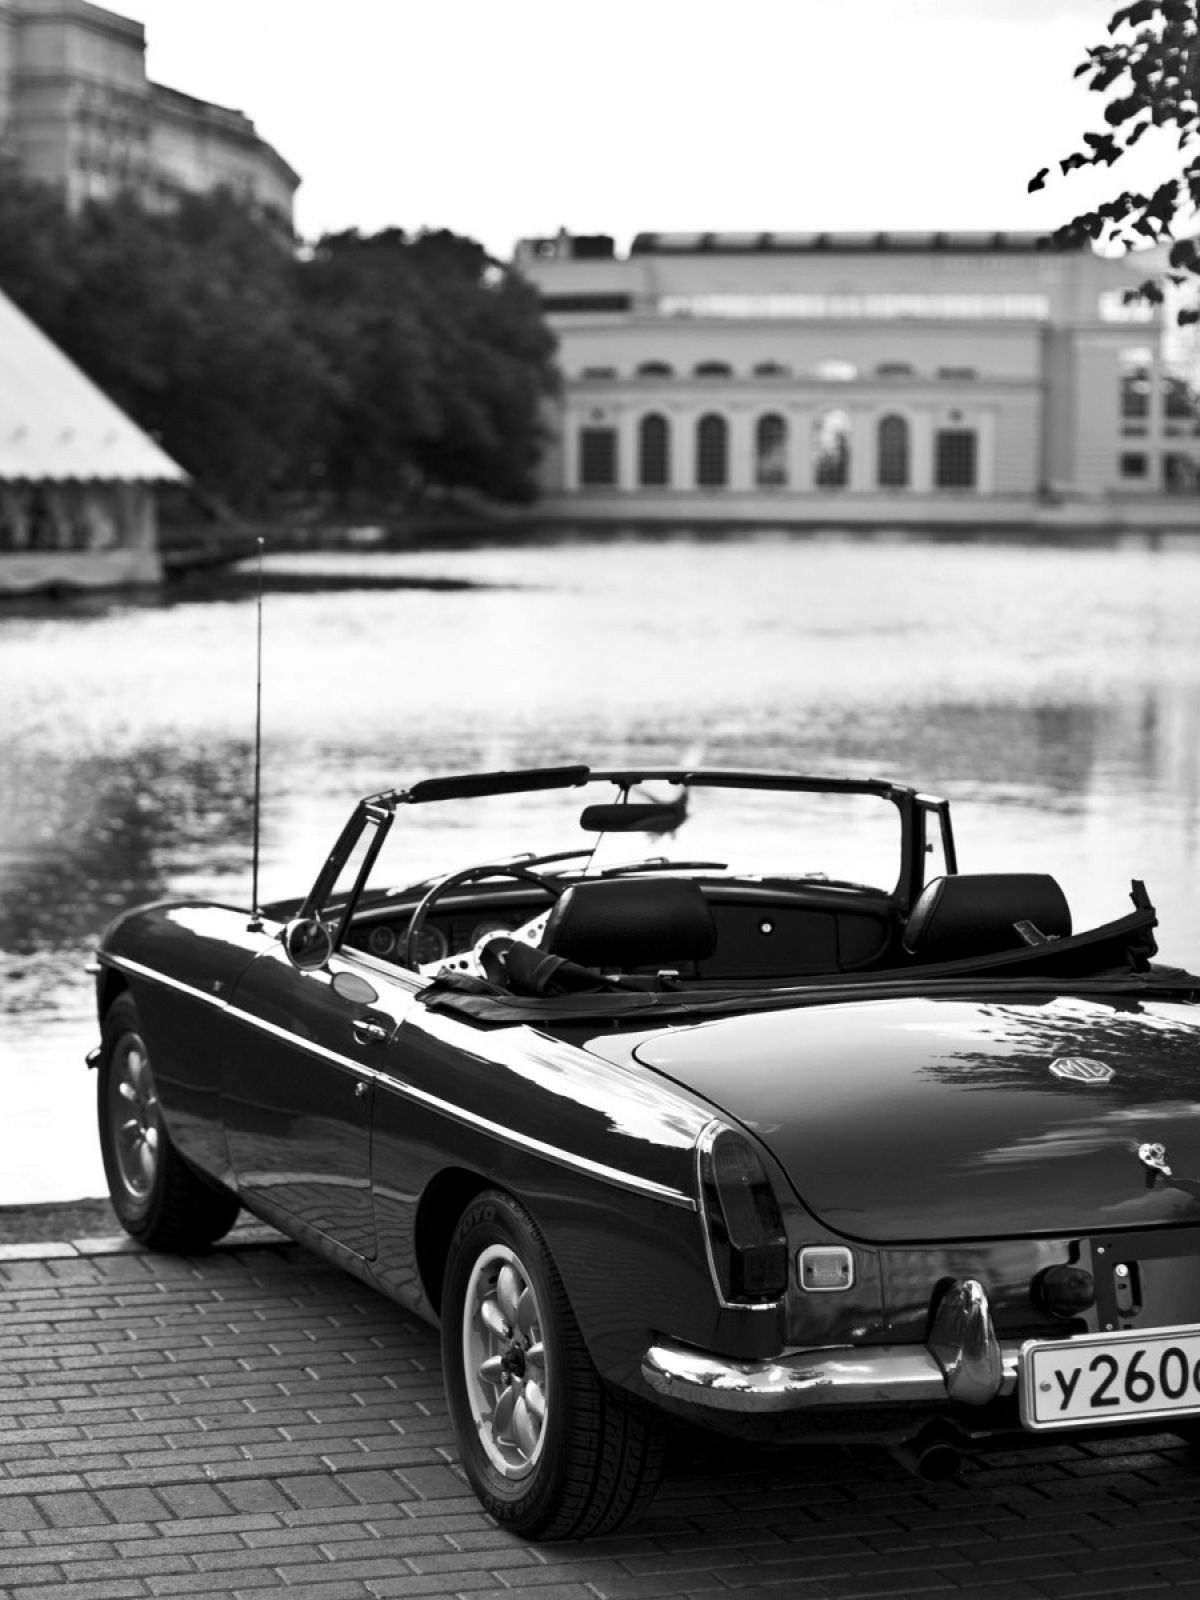 Retro Car Black And White Lake Android Wallpaper free download